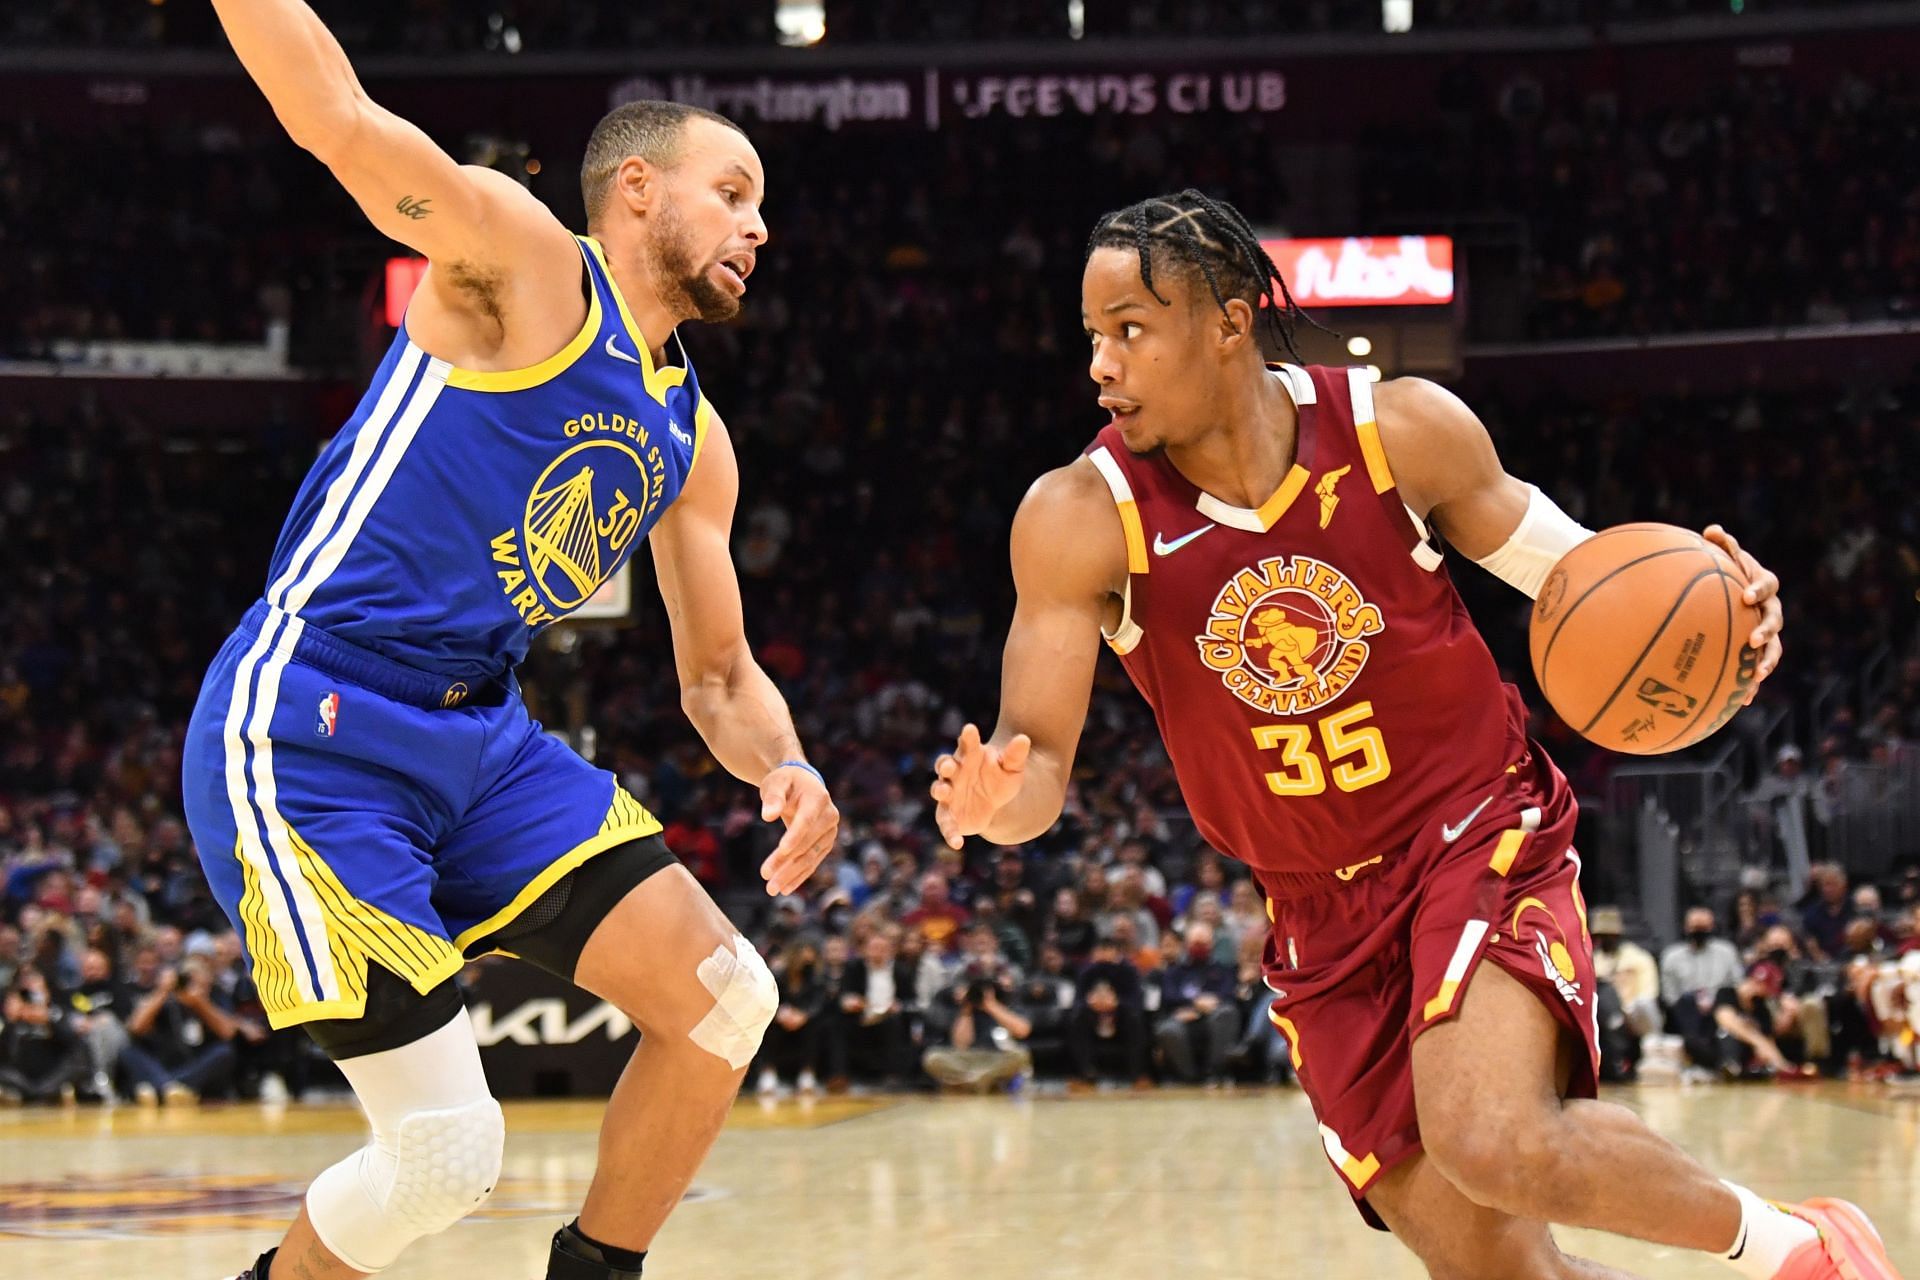 Stephen Curry of the Golden State Warriors against Isaac Okoro of the Cleveland Cavaliers